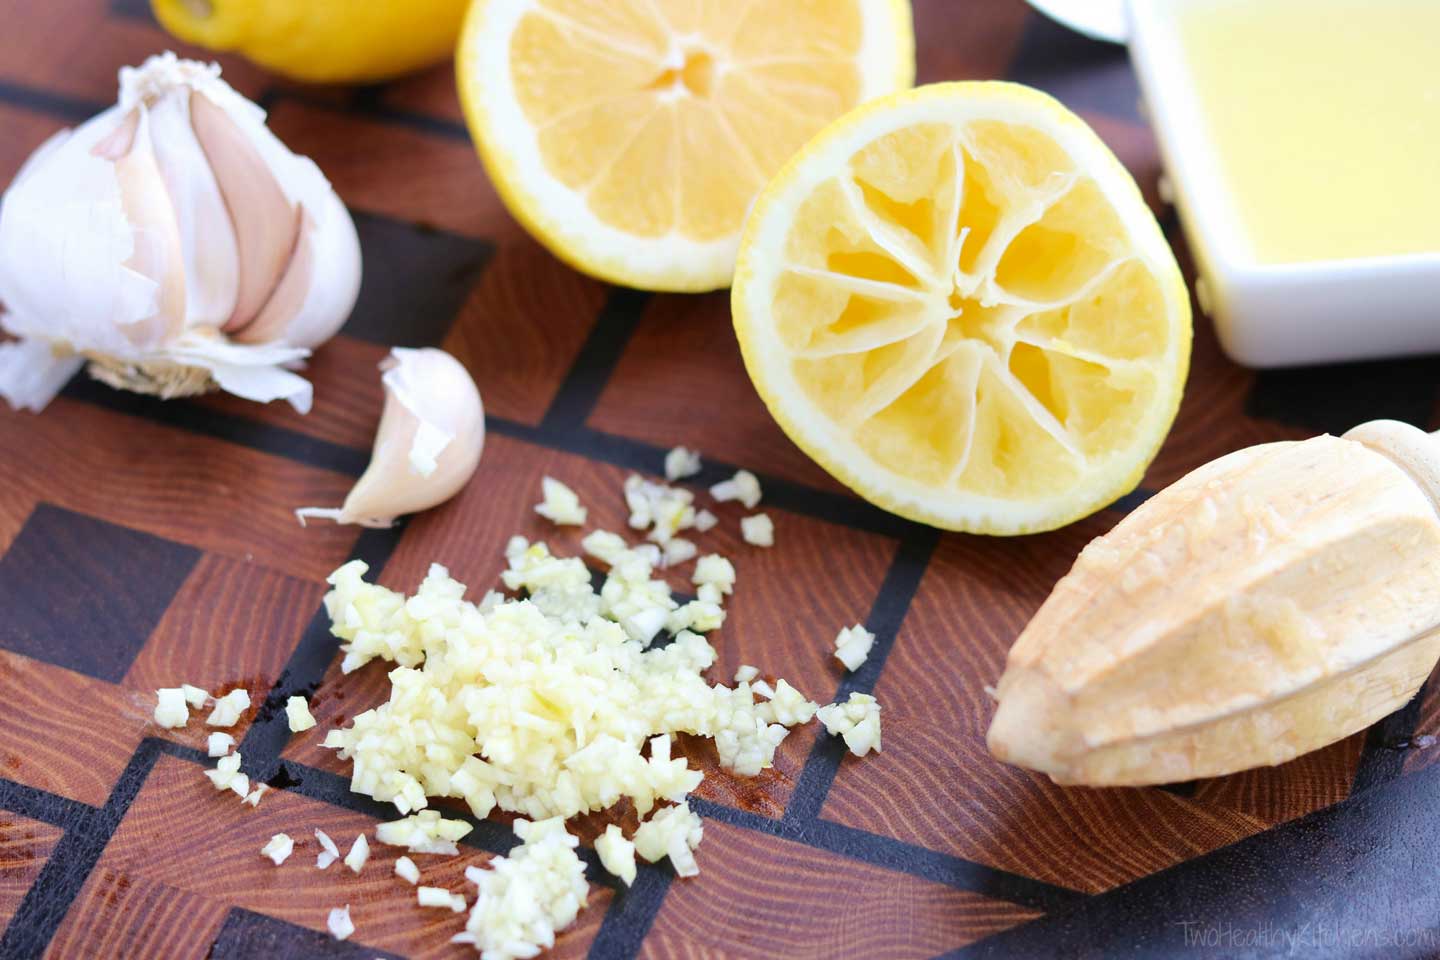 cutting board with garlic cloves and also minced garlic, and with cut lemons with a lemon juicer and a little square bowl of juice